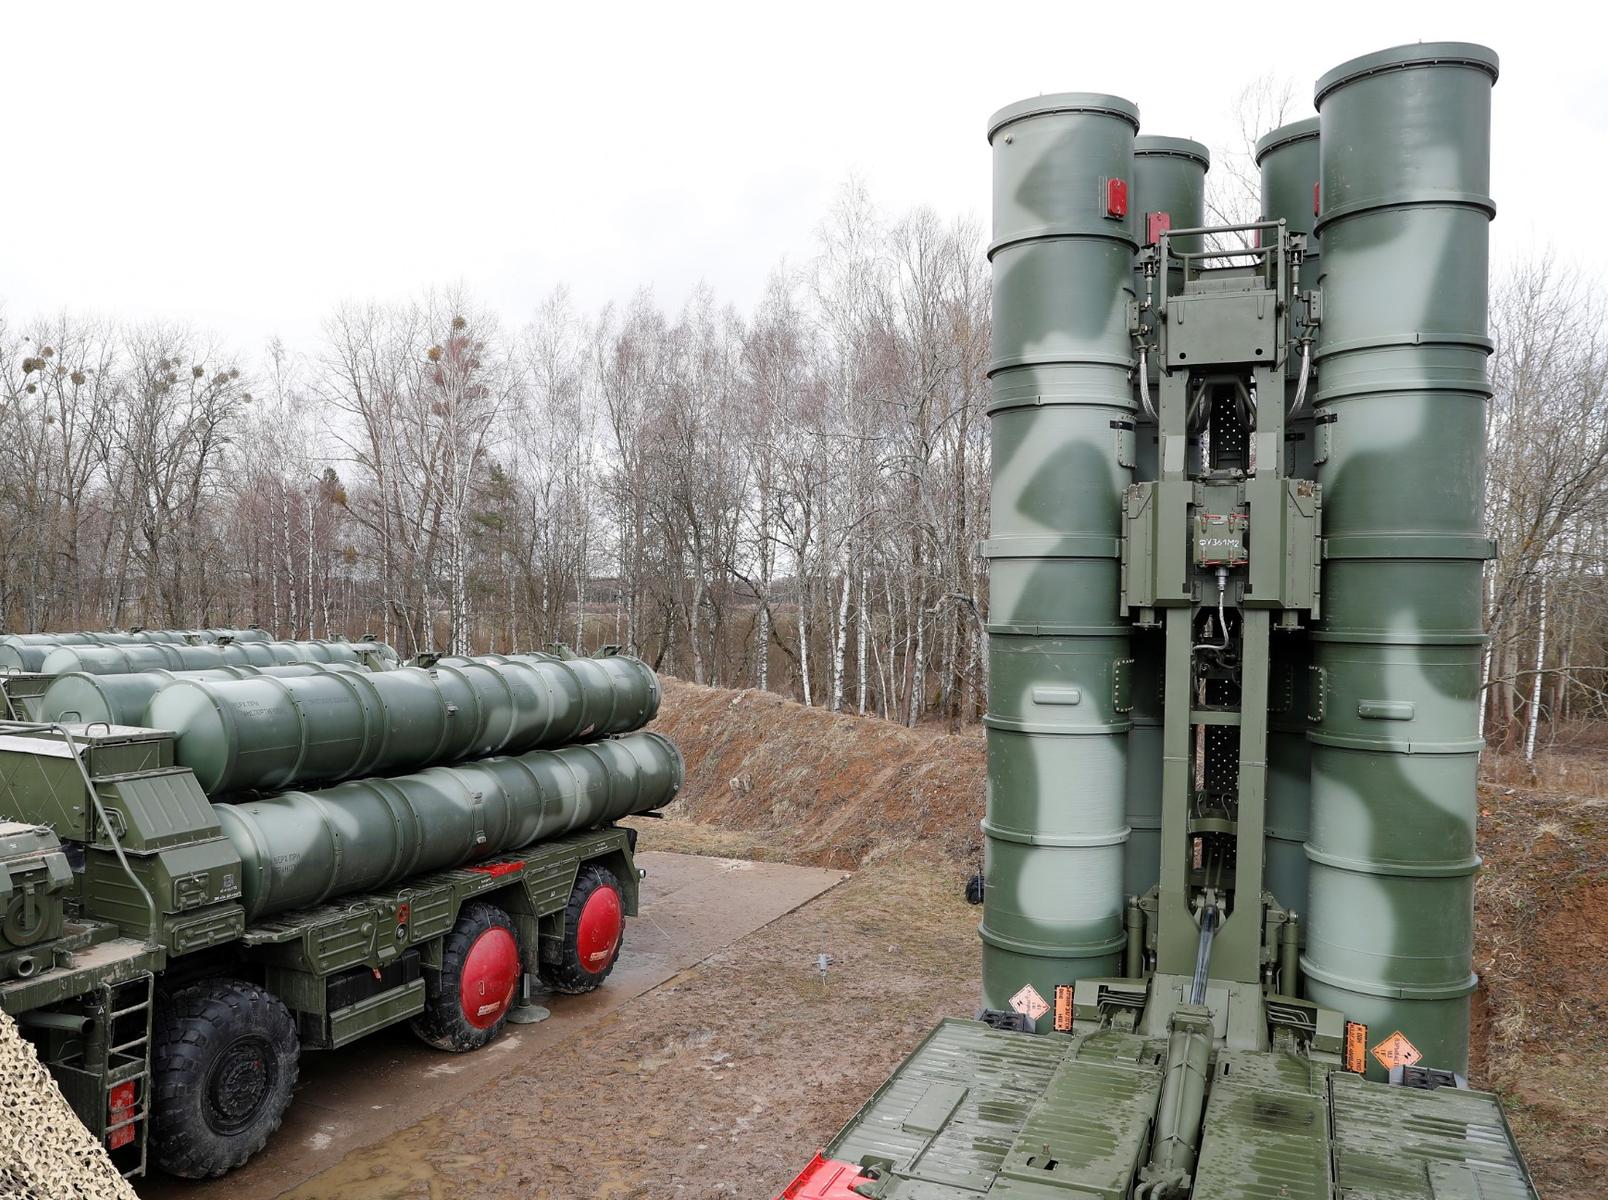 Russian S-400 Surface-to-Air Missile System: Is It Worth the